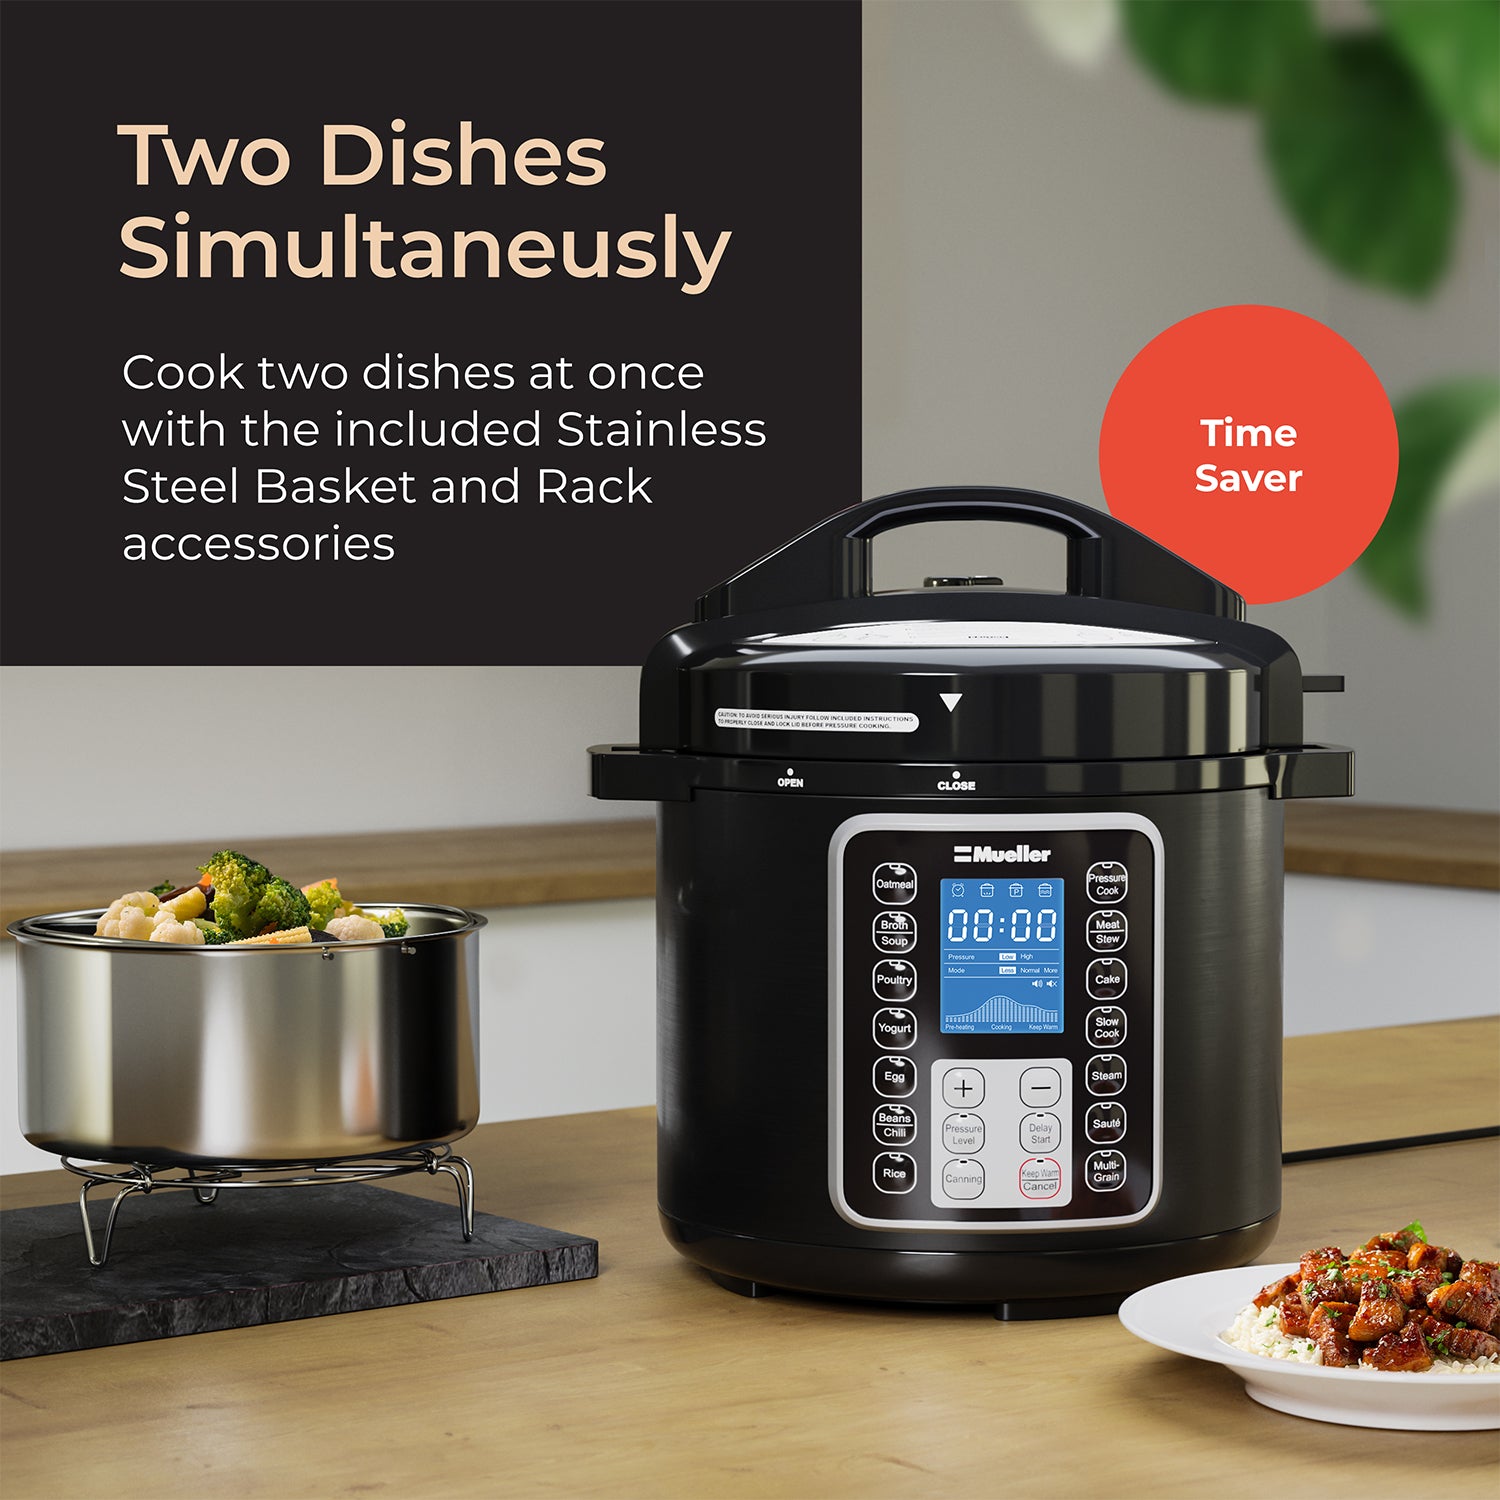 6 Quart 5-in-1 Electric Pressure Cooker with Stainless Steel